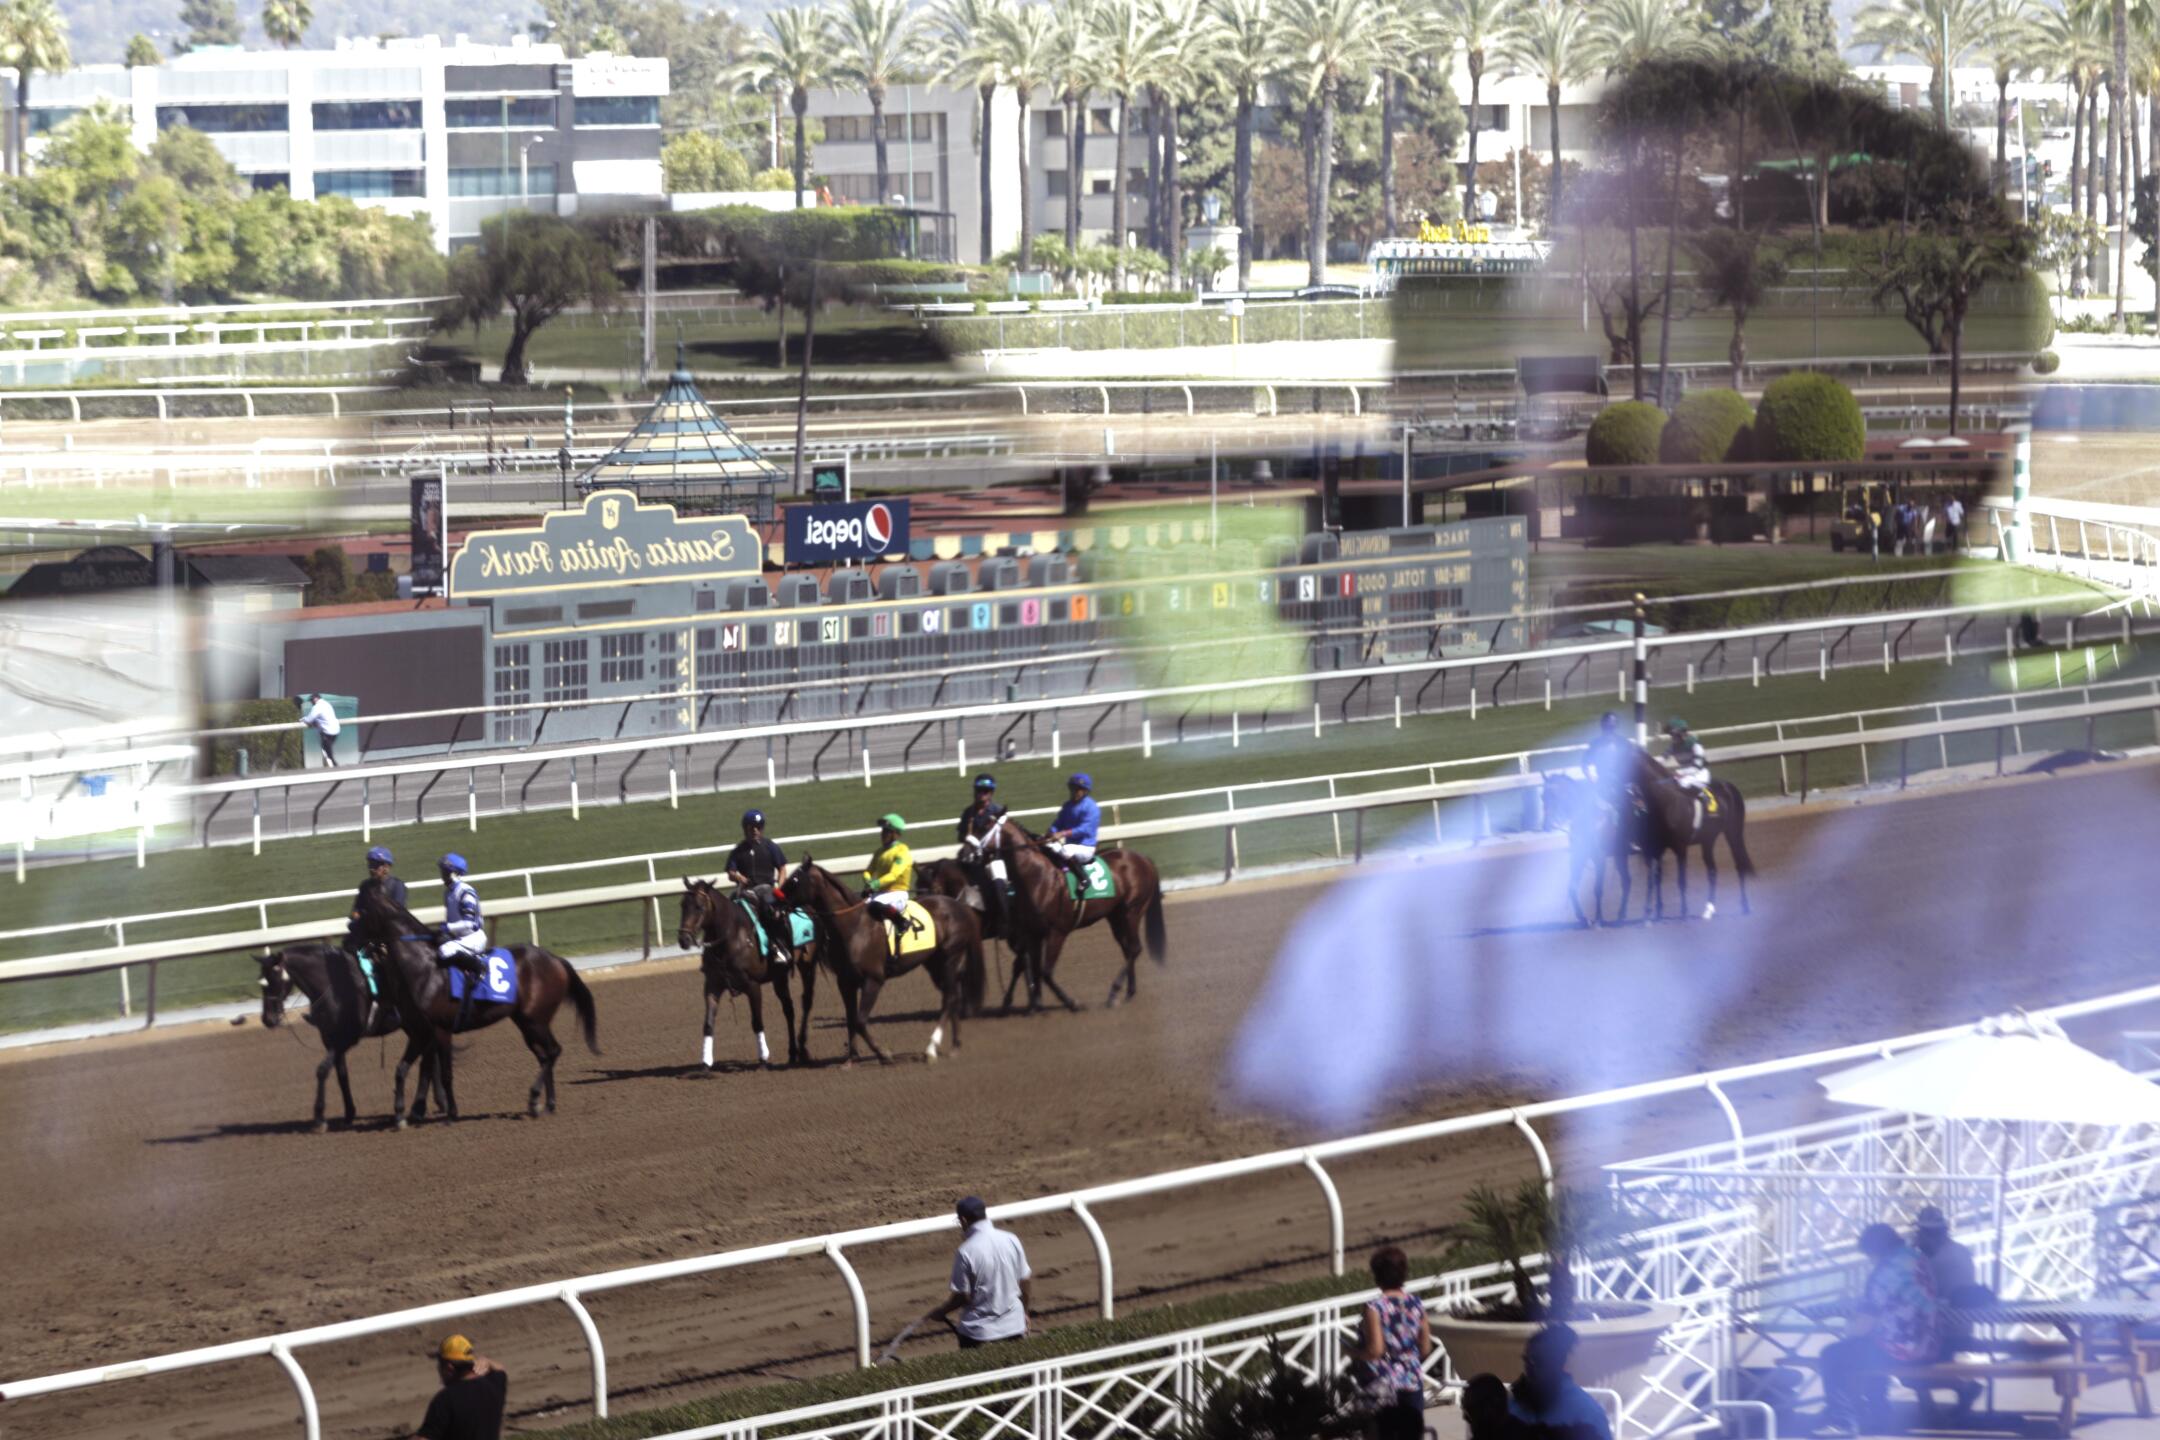 Santa Anita opening day, a little more than a year after closing due to